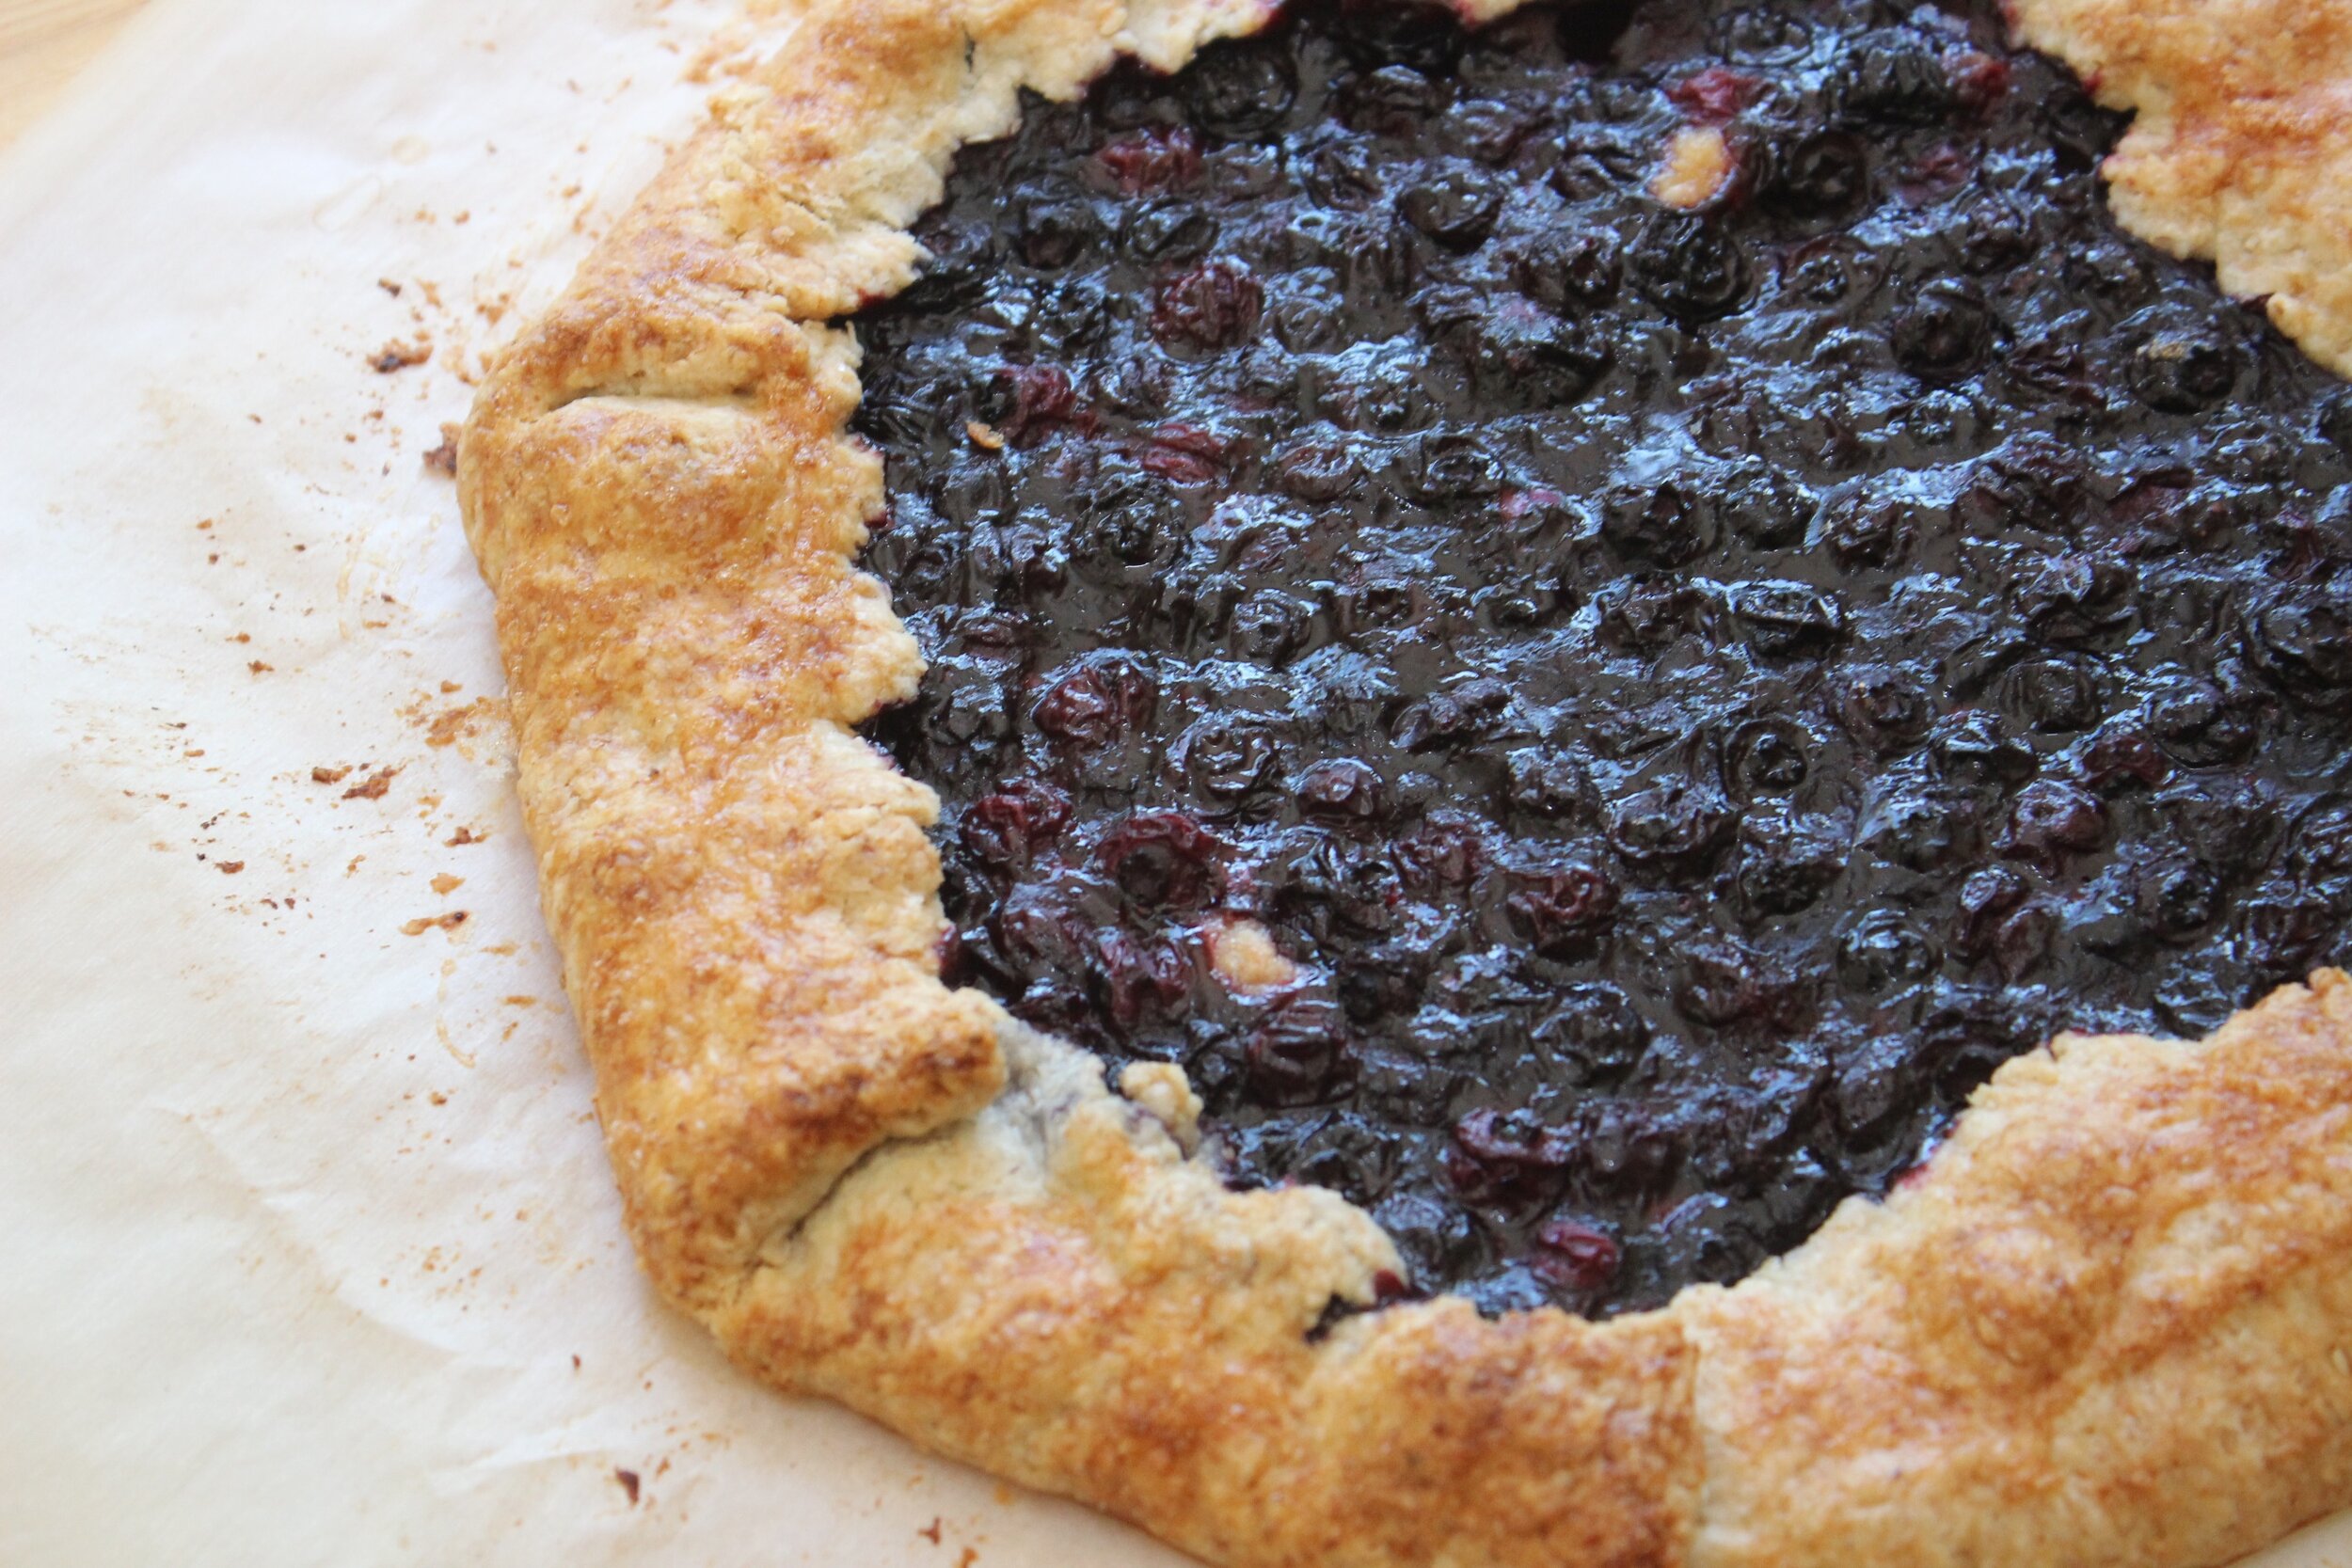 Blueberry Galette_Rolling In The Dough Class_Cooking School_Carriage House Cooking School.jpg